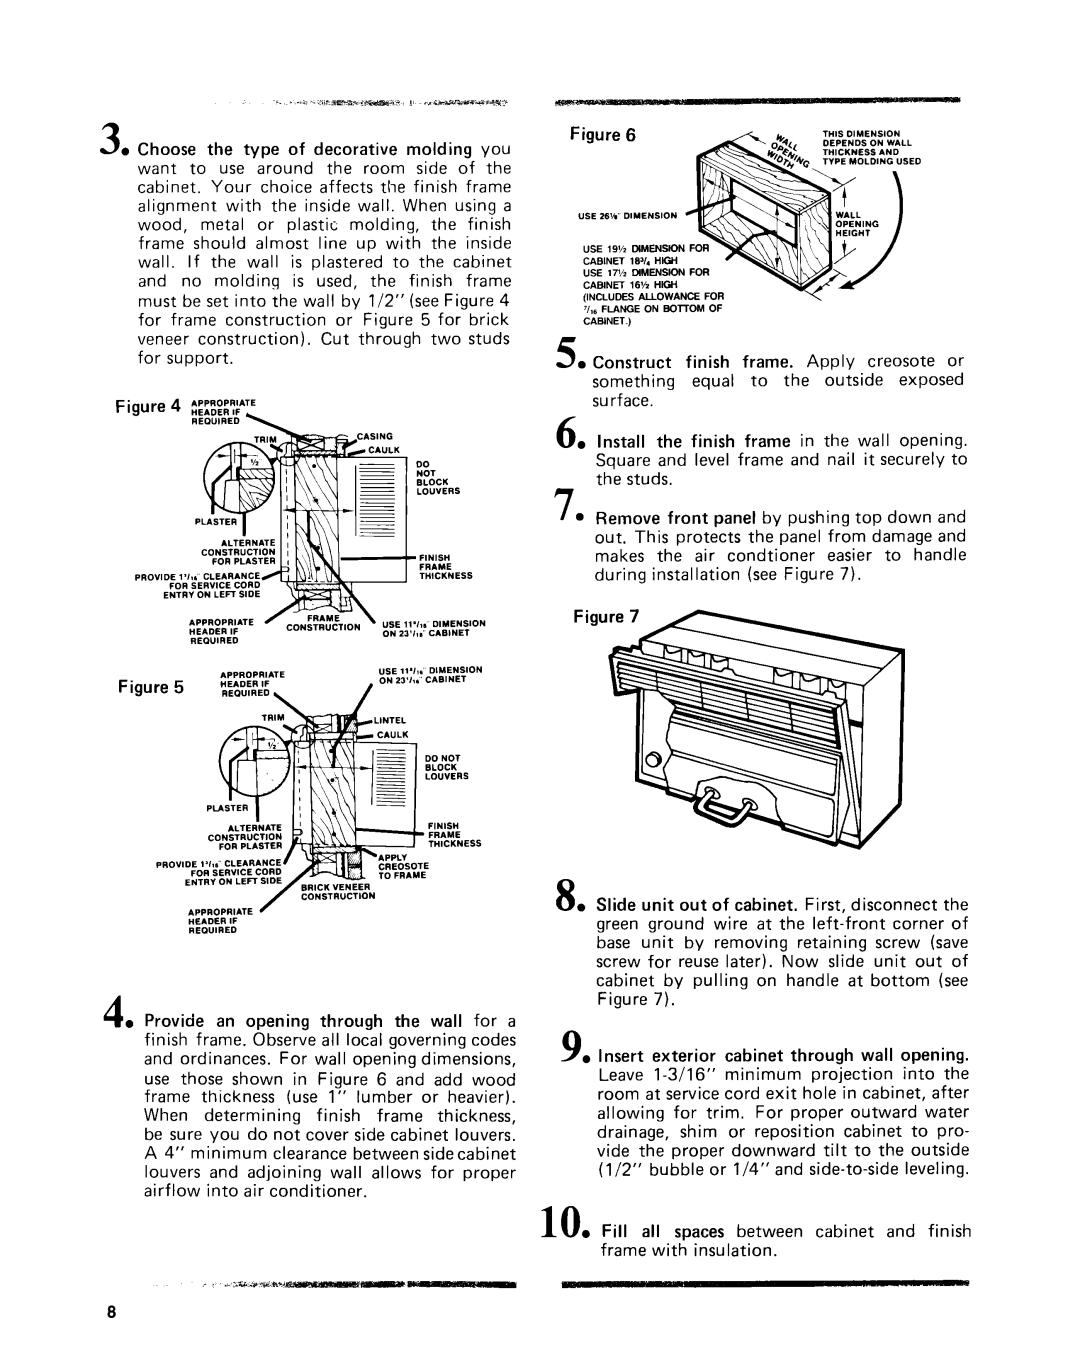 Whirlpool Air Conditioner manual 